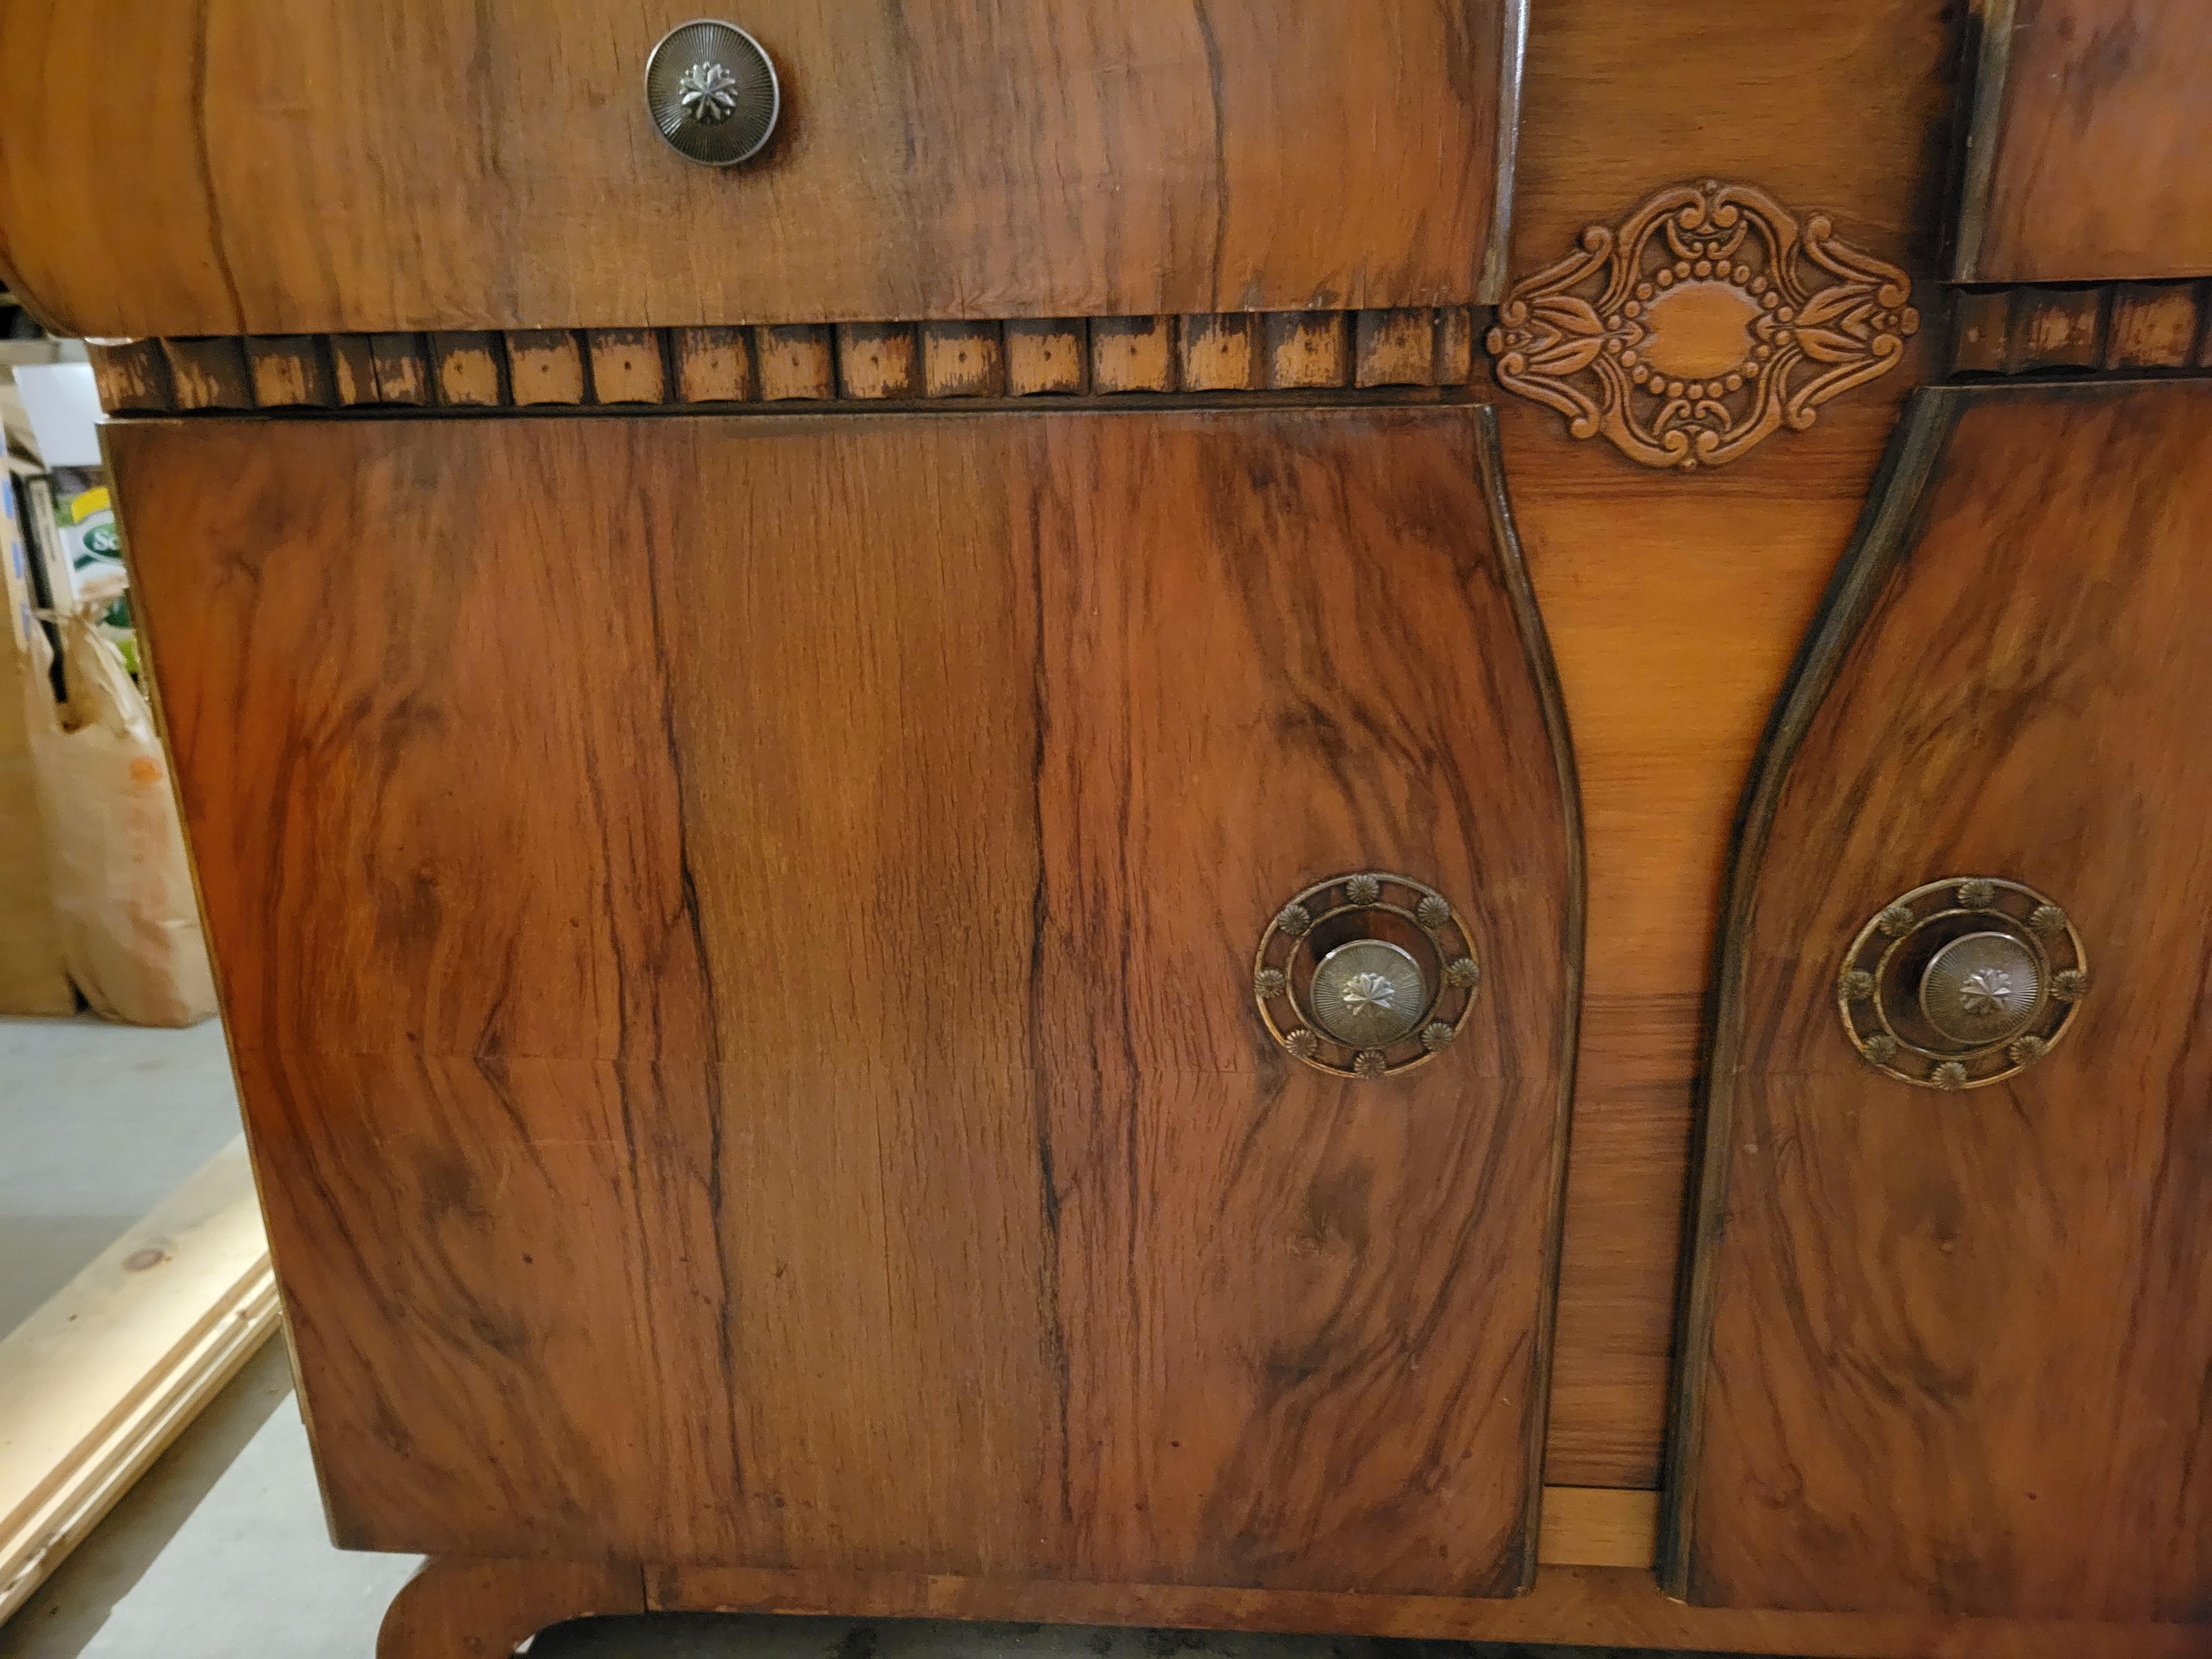 The antique chest made of solid wood and decorated with veneer. The wood is quite light and looks like walnut or birch. The chest has two drawers on top and a lower compartment divided by a horizontal shelf. The doors and drawers open and close